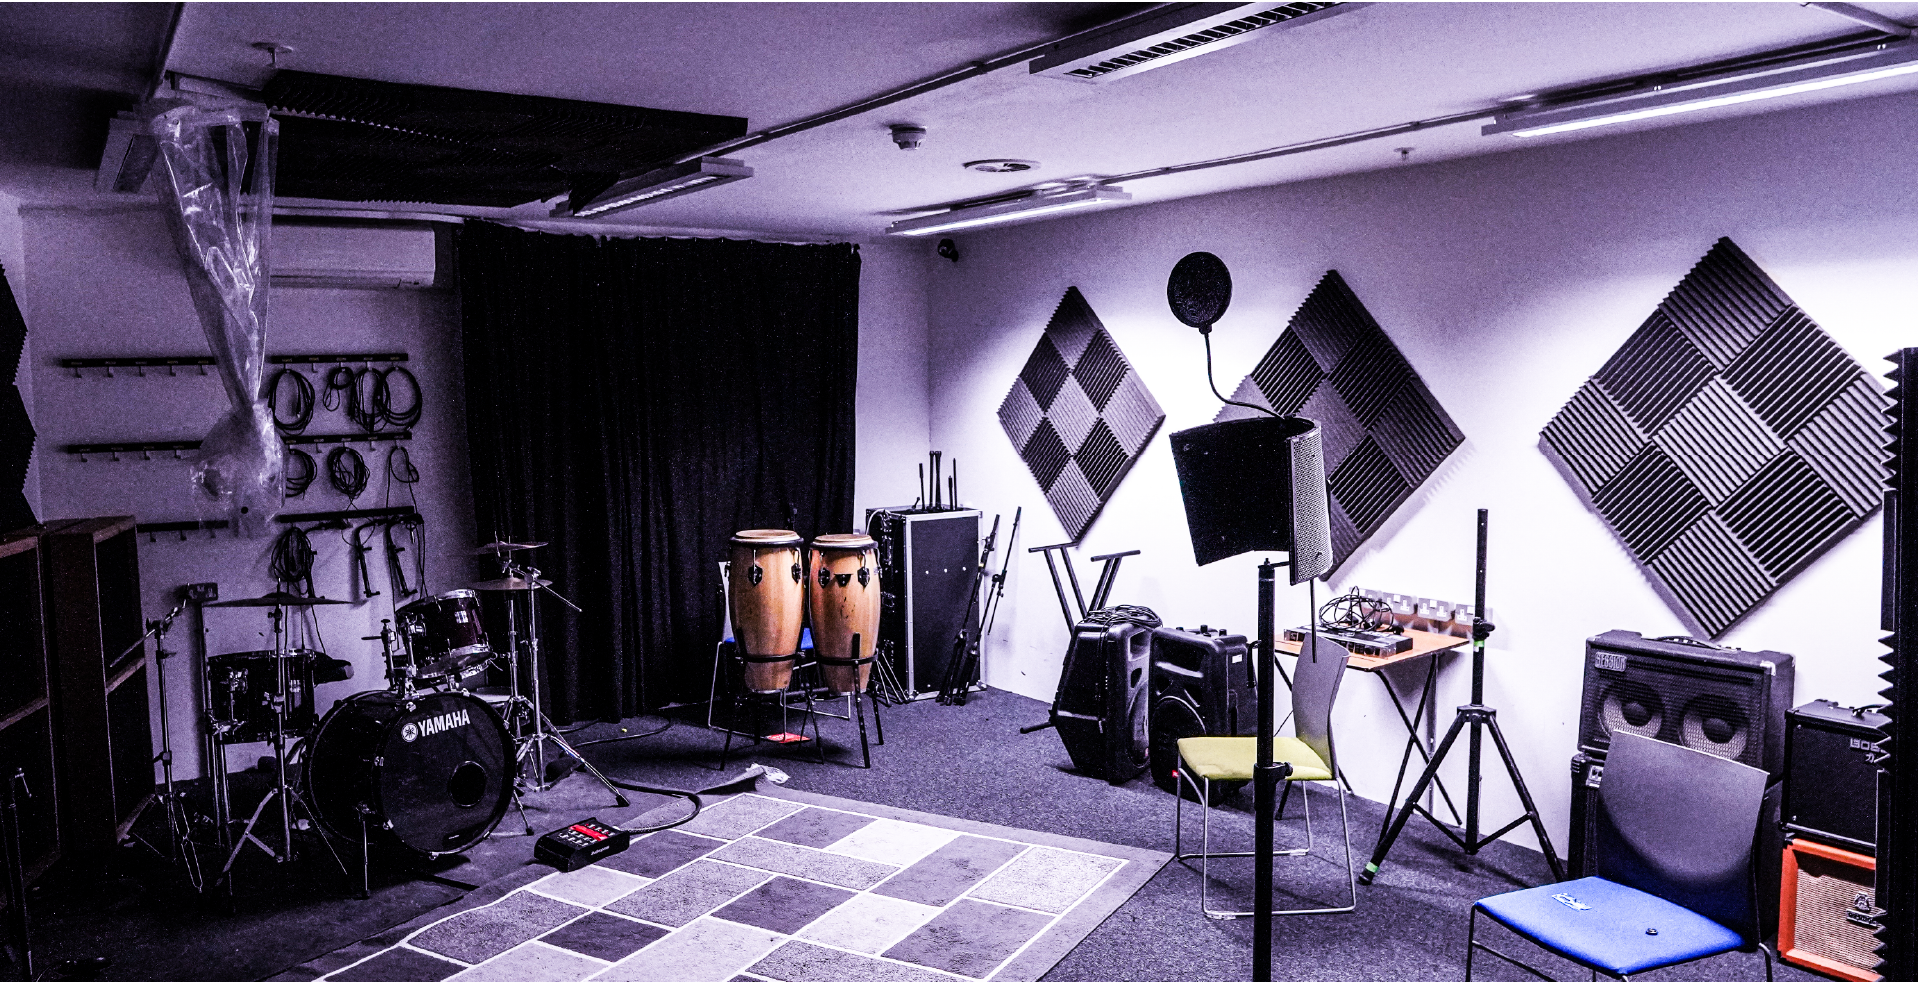 Image of recording studio with music equipment around the room including drums, conga drums and a pop filter